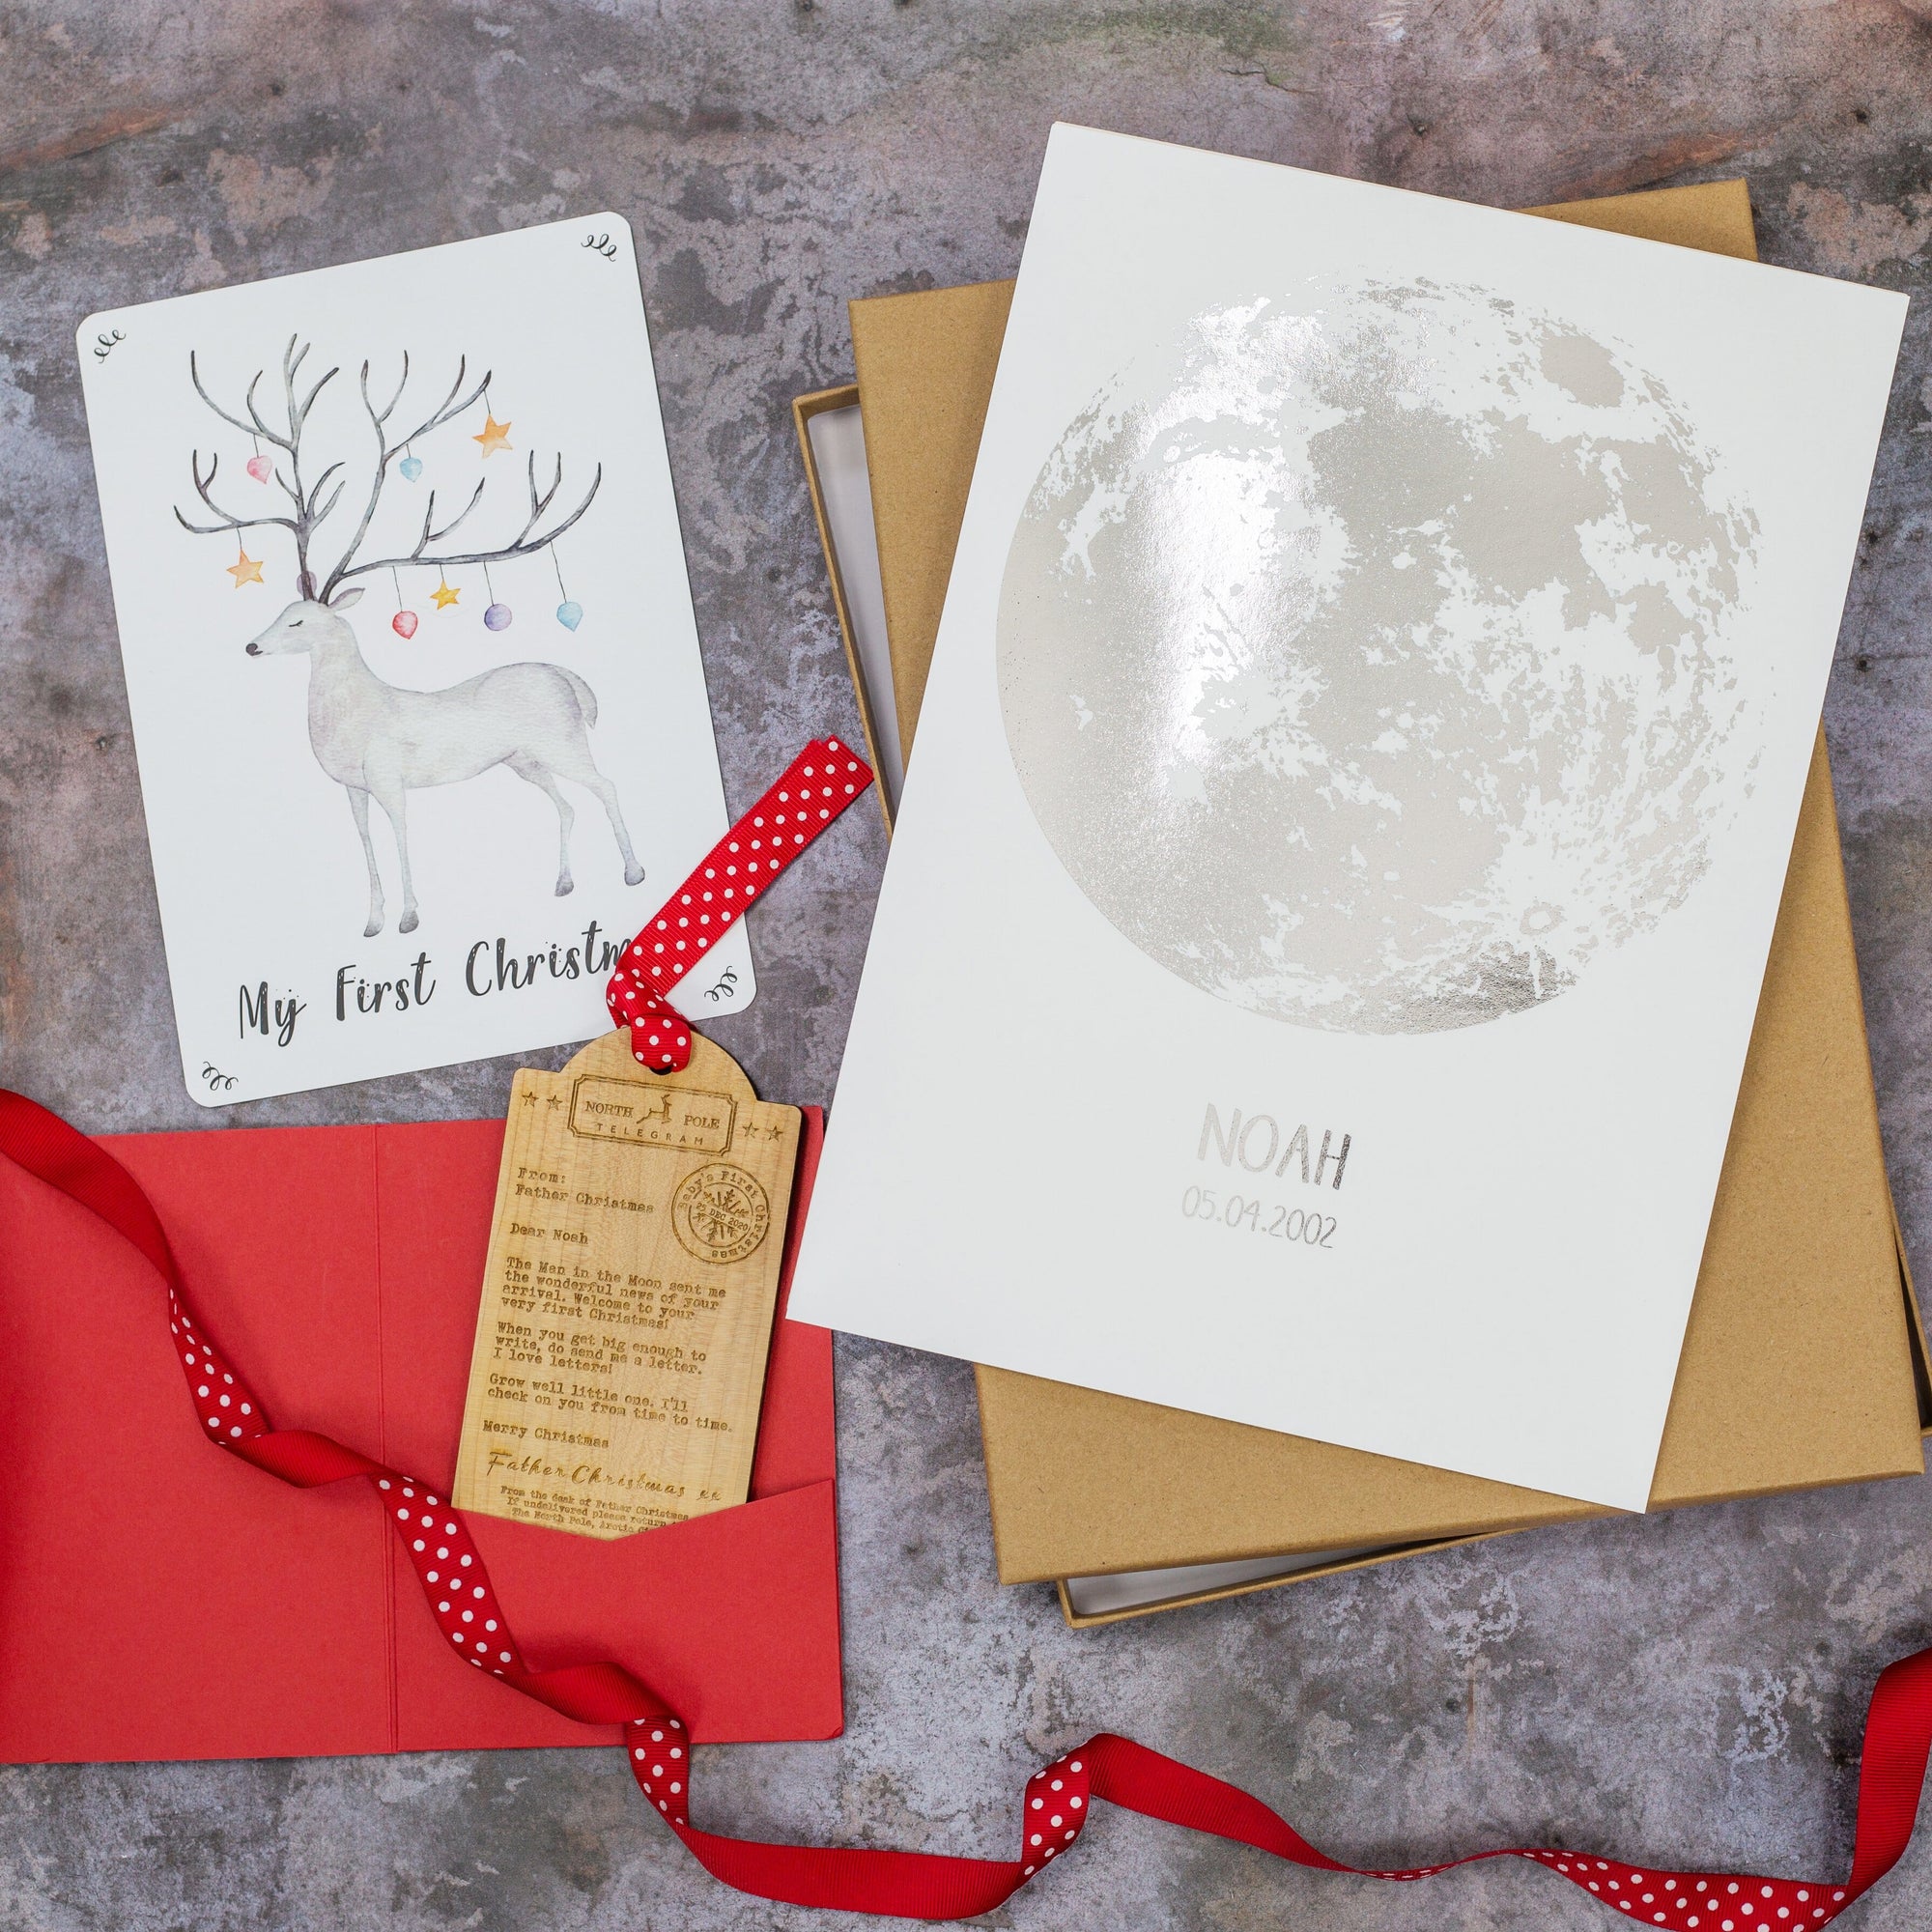 Baby's Letterbox gift with a silver moon personalised print, hand painted print of a reindeer and a luggage tag shaped wooden decoration engraved with a typed message from Father Christmas